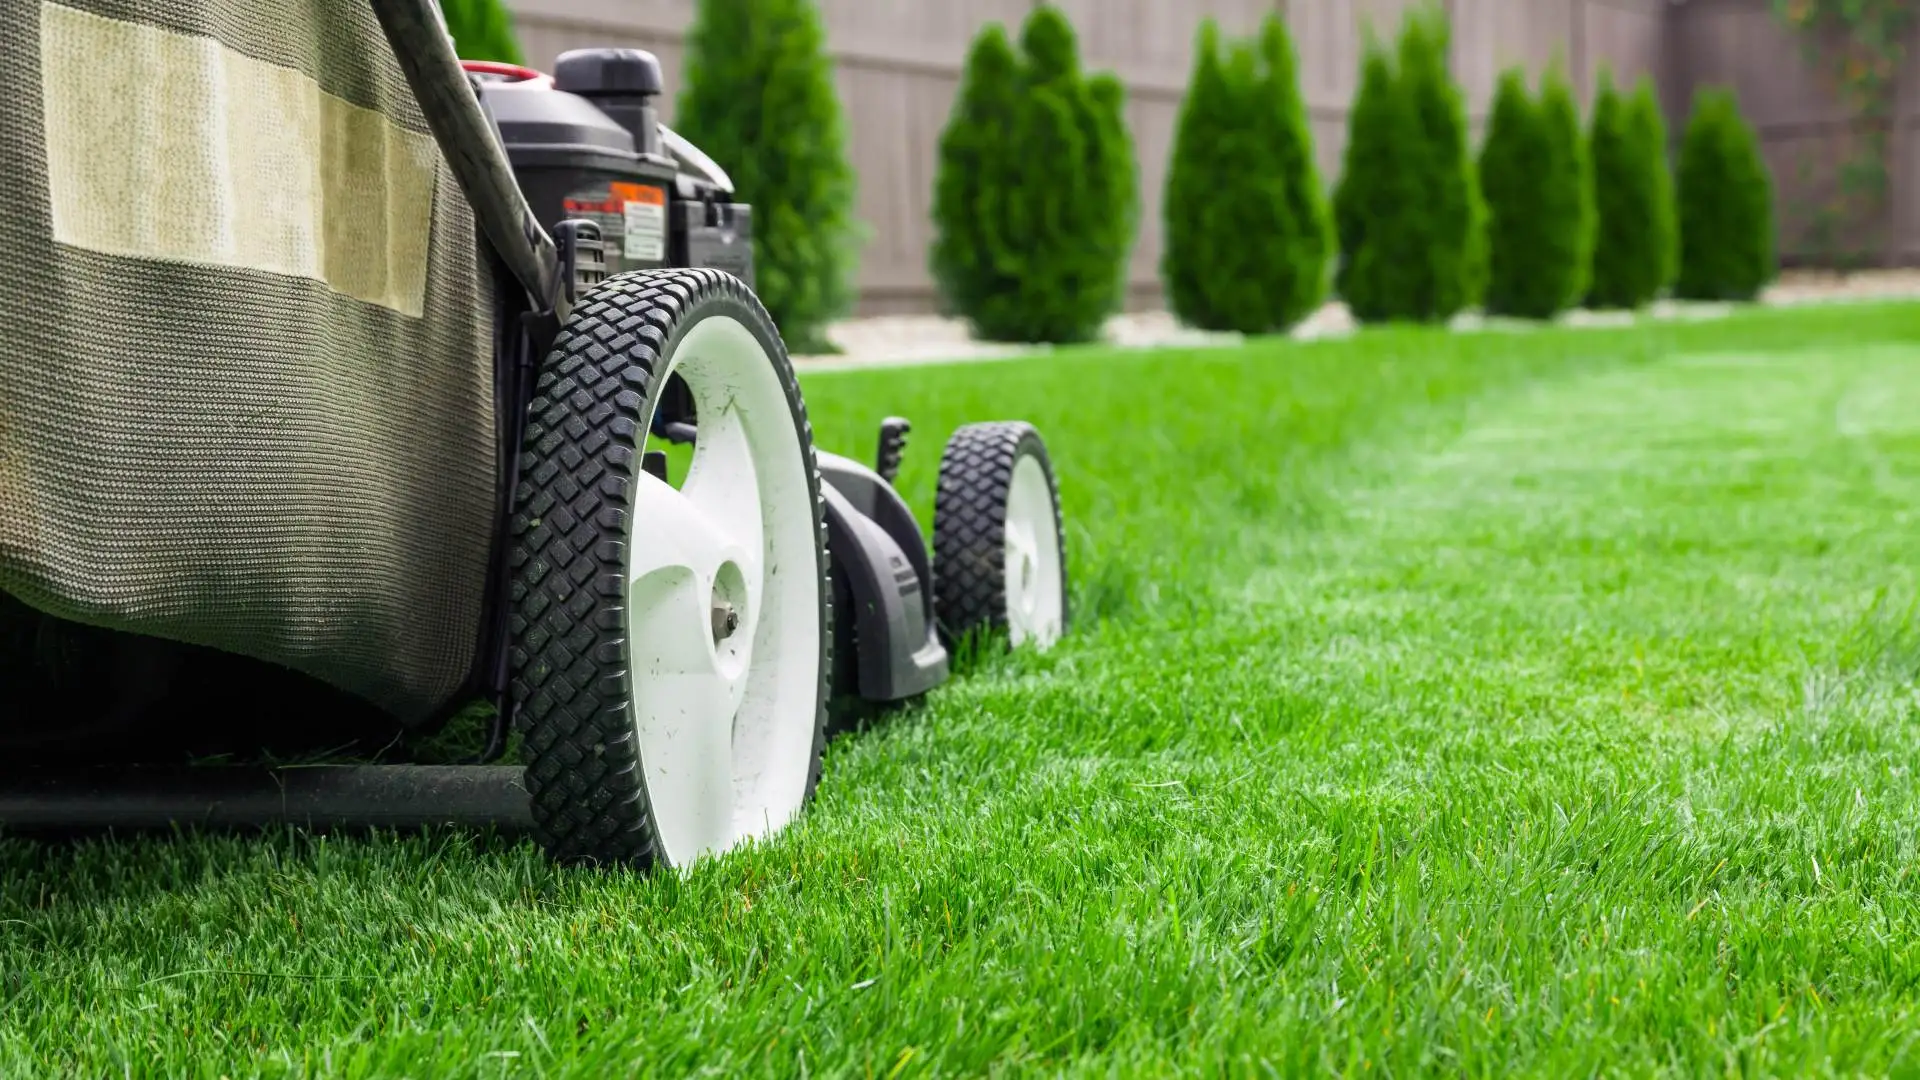 The Fastest Ways to Ruin Your Grass When Mowing Your Lawn